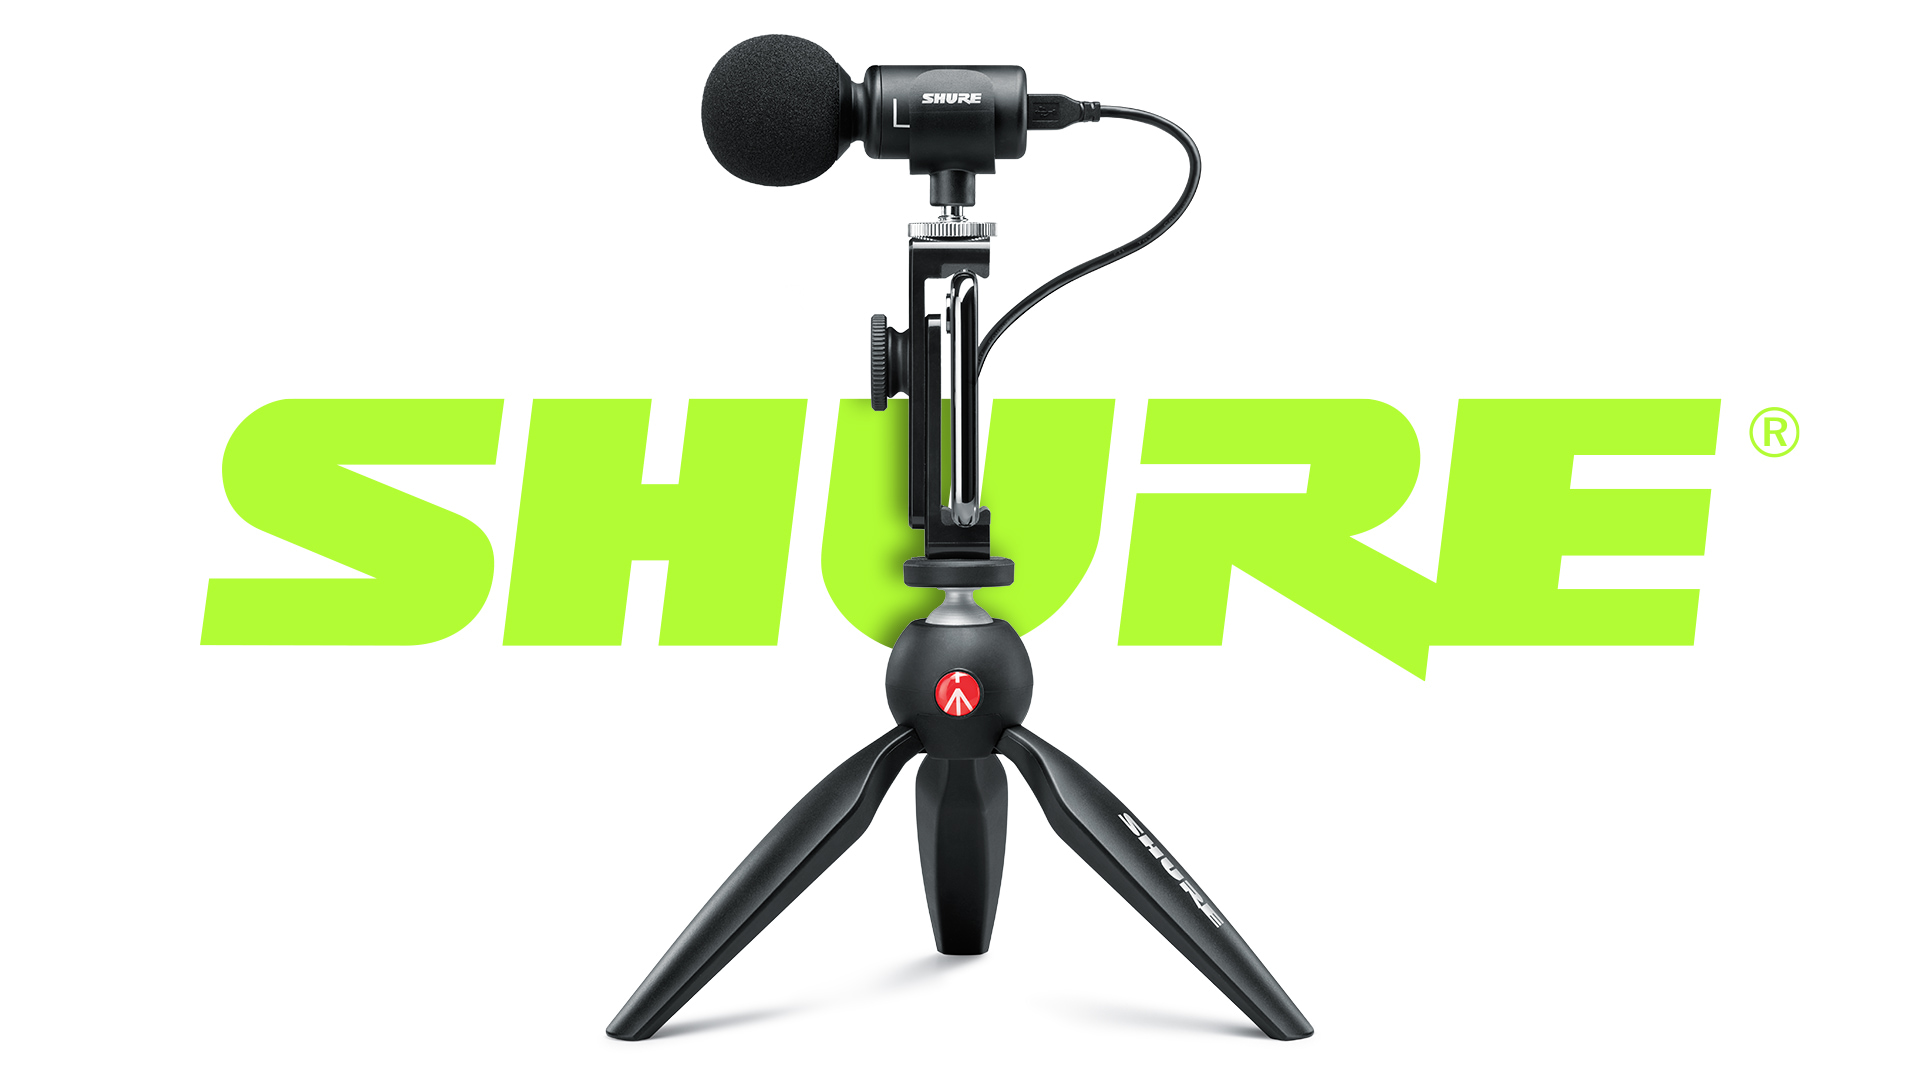 Shure microphone with Shure logo